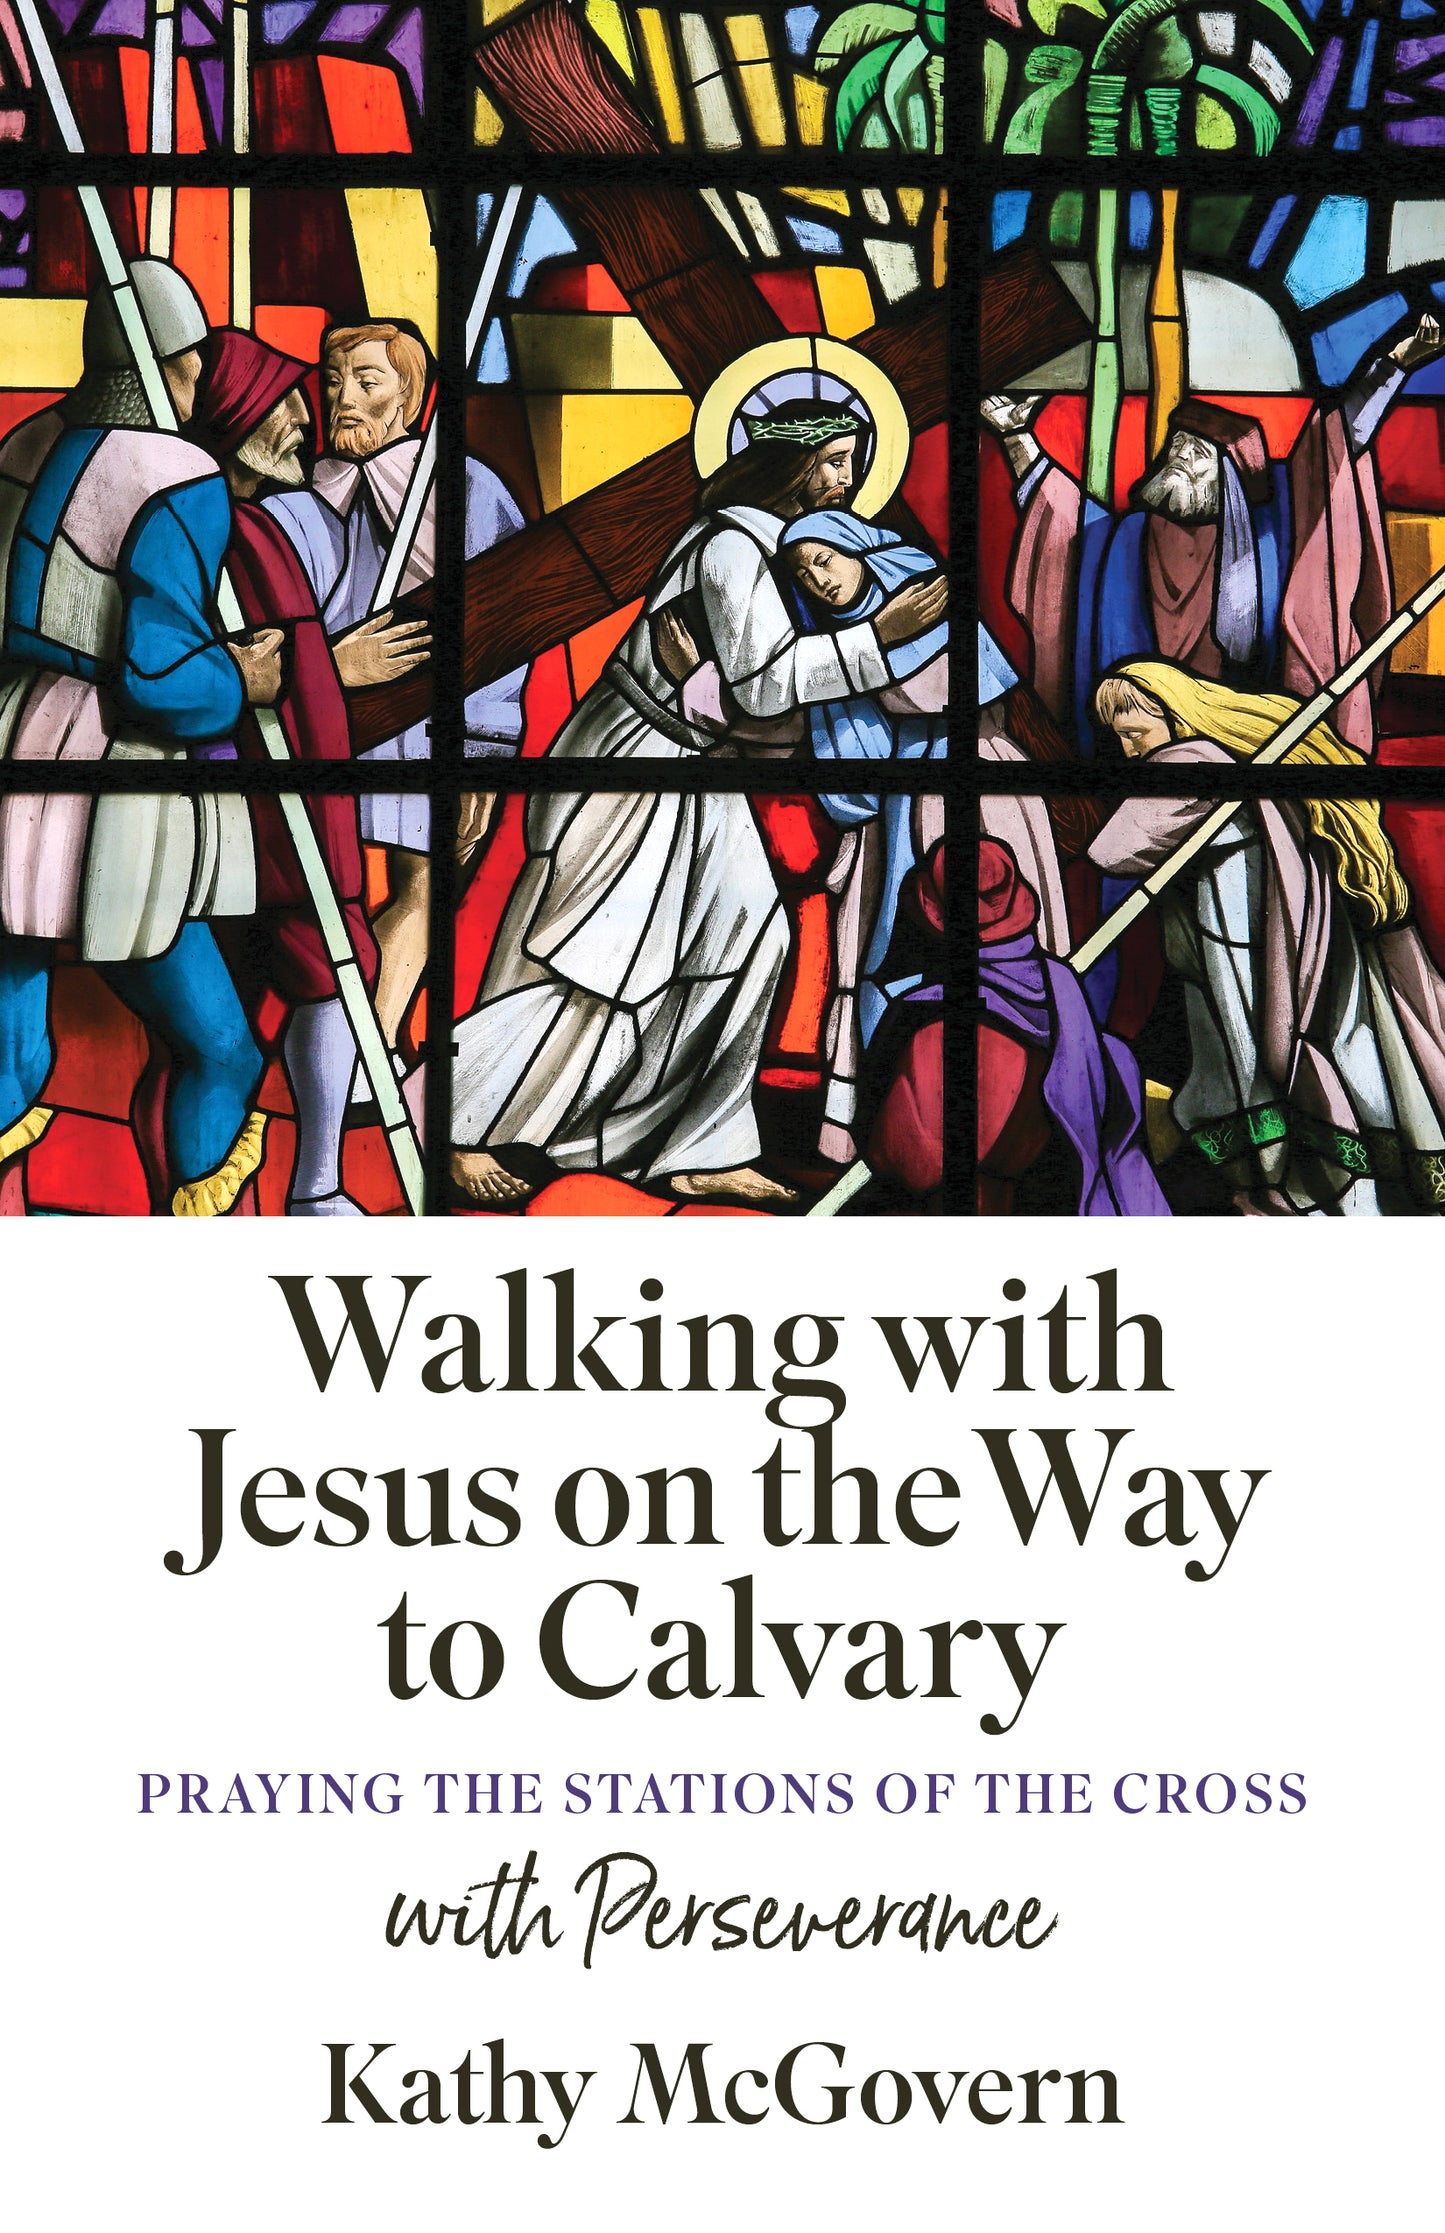 Walking with Jesus on the Way to Calvary